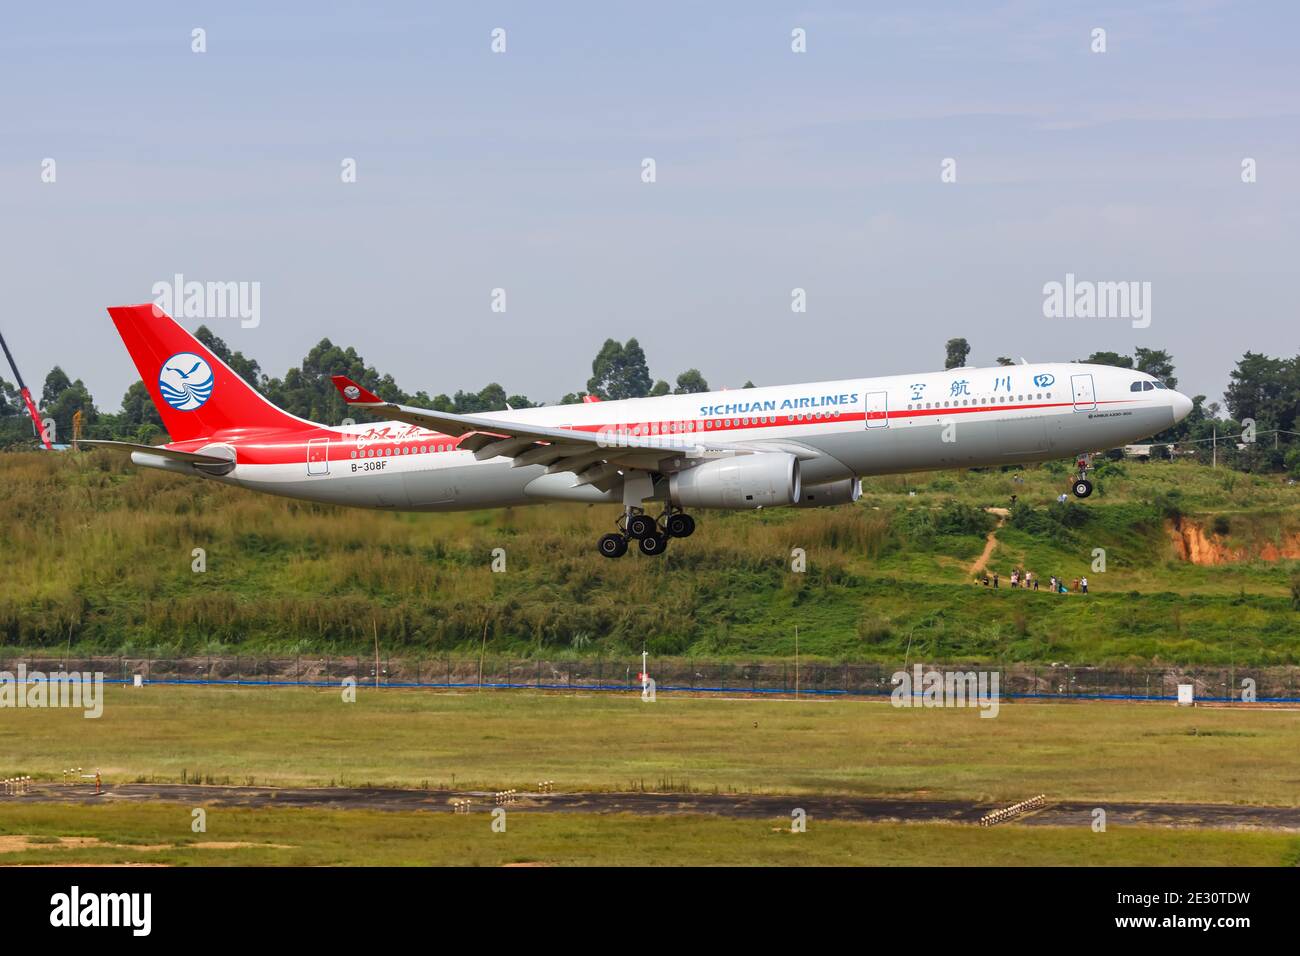 Chengdu, China - September 21, 2019: Sichuan Airlines Airbus A330-300 airplane at Chengdu Airport (CTU) in China. Airbus is a European aircraft manufa Stock Photo